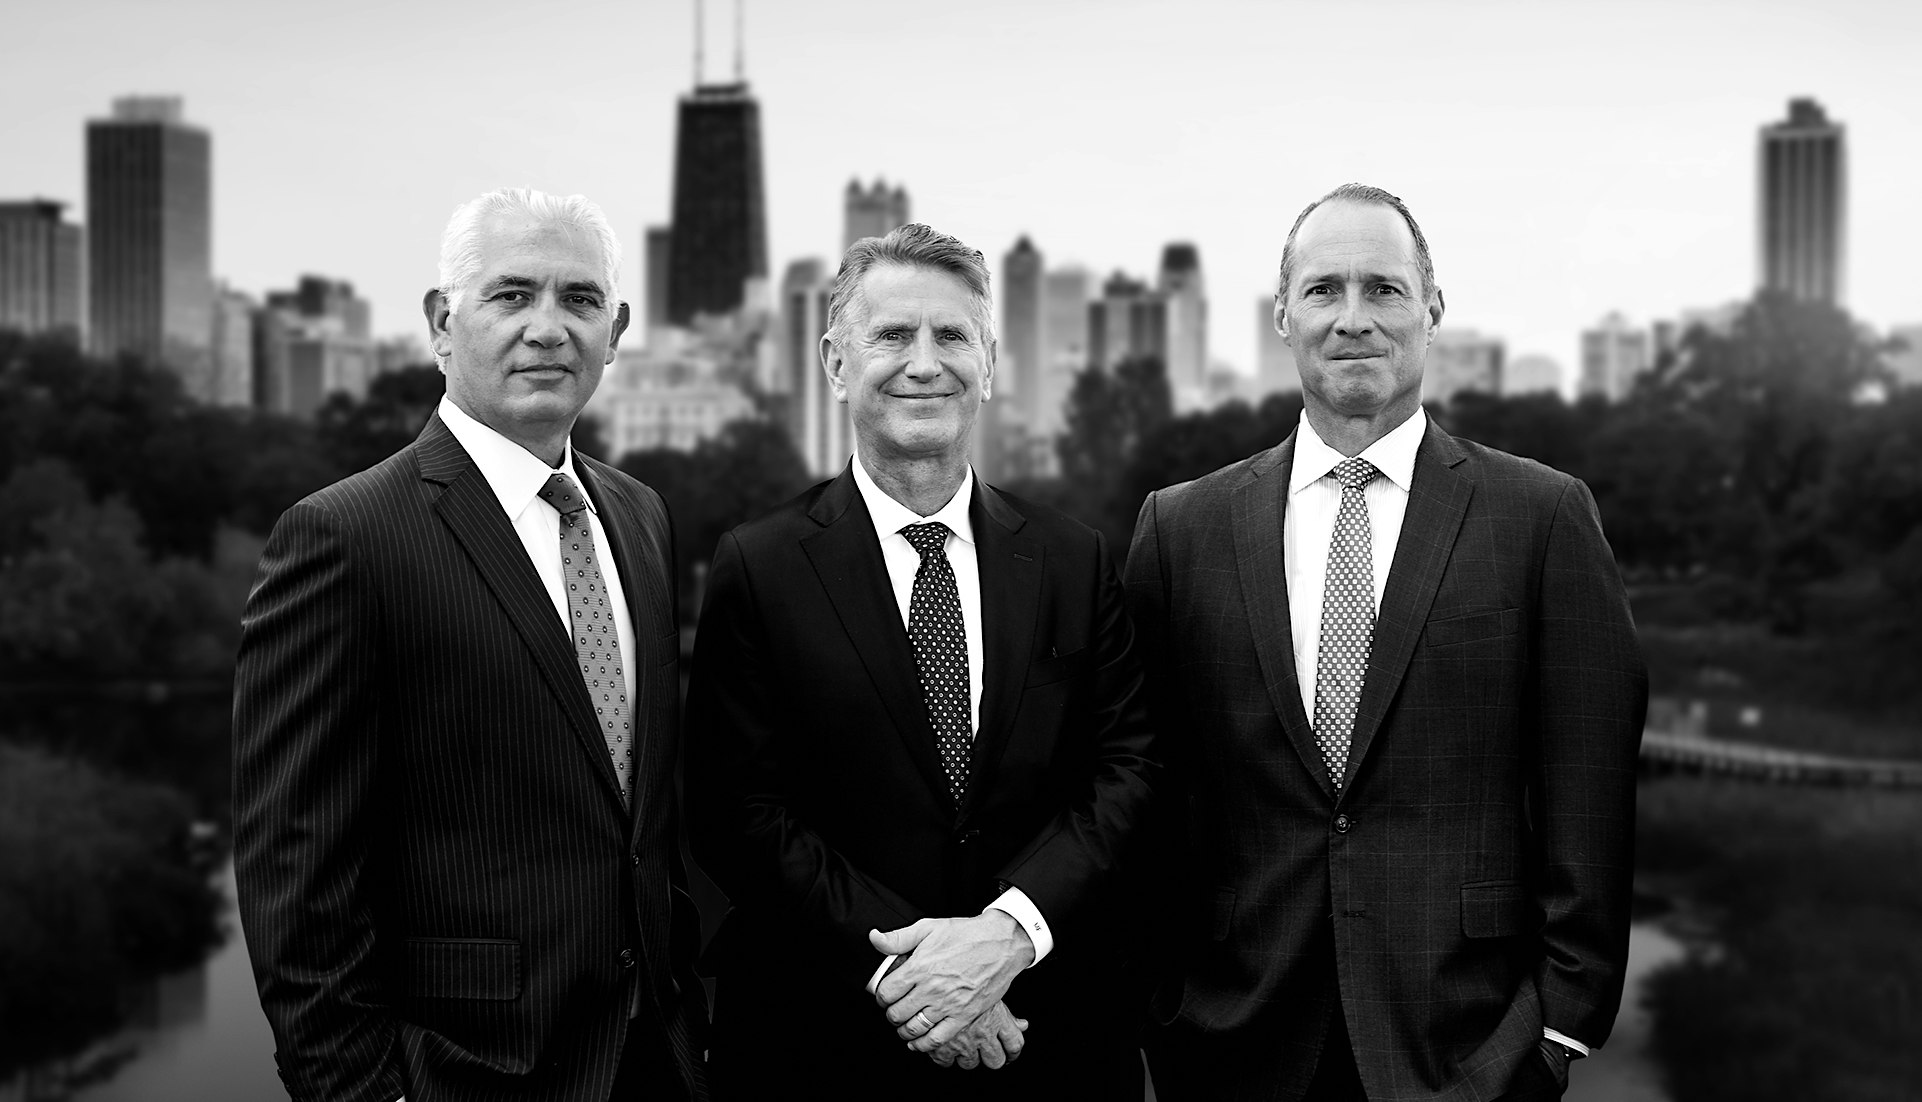 Chicago Trial Lawyers with Chicago skyline in background.